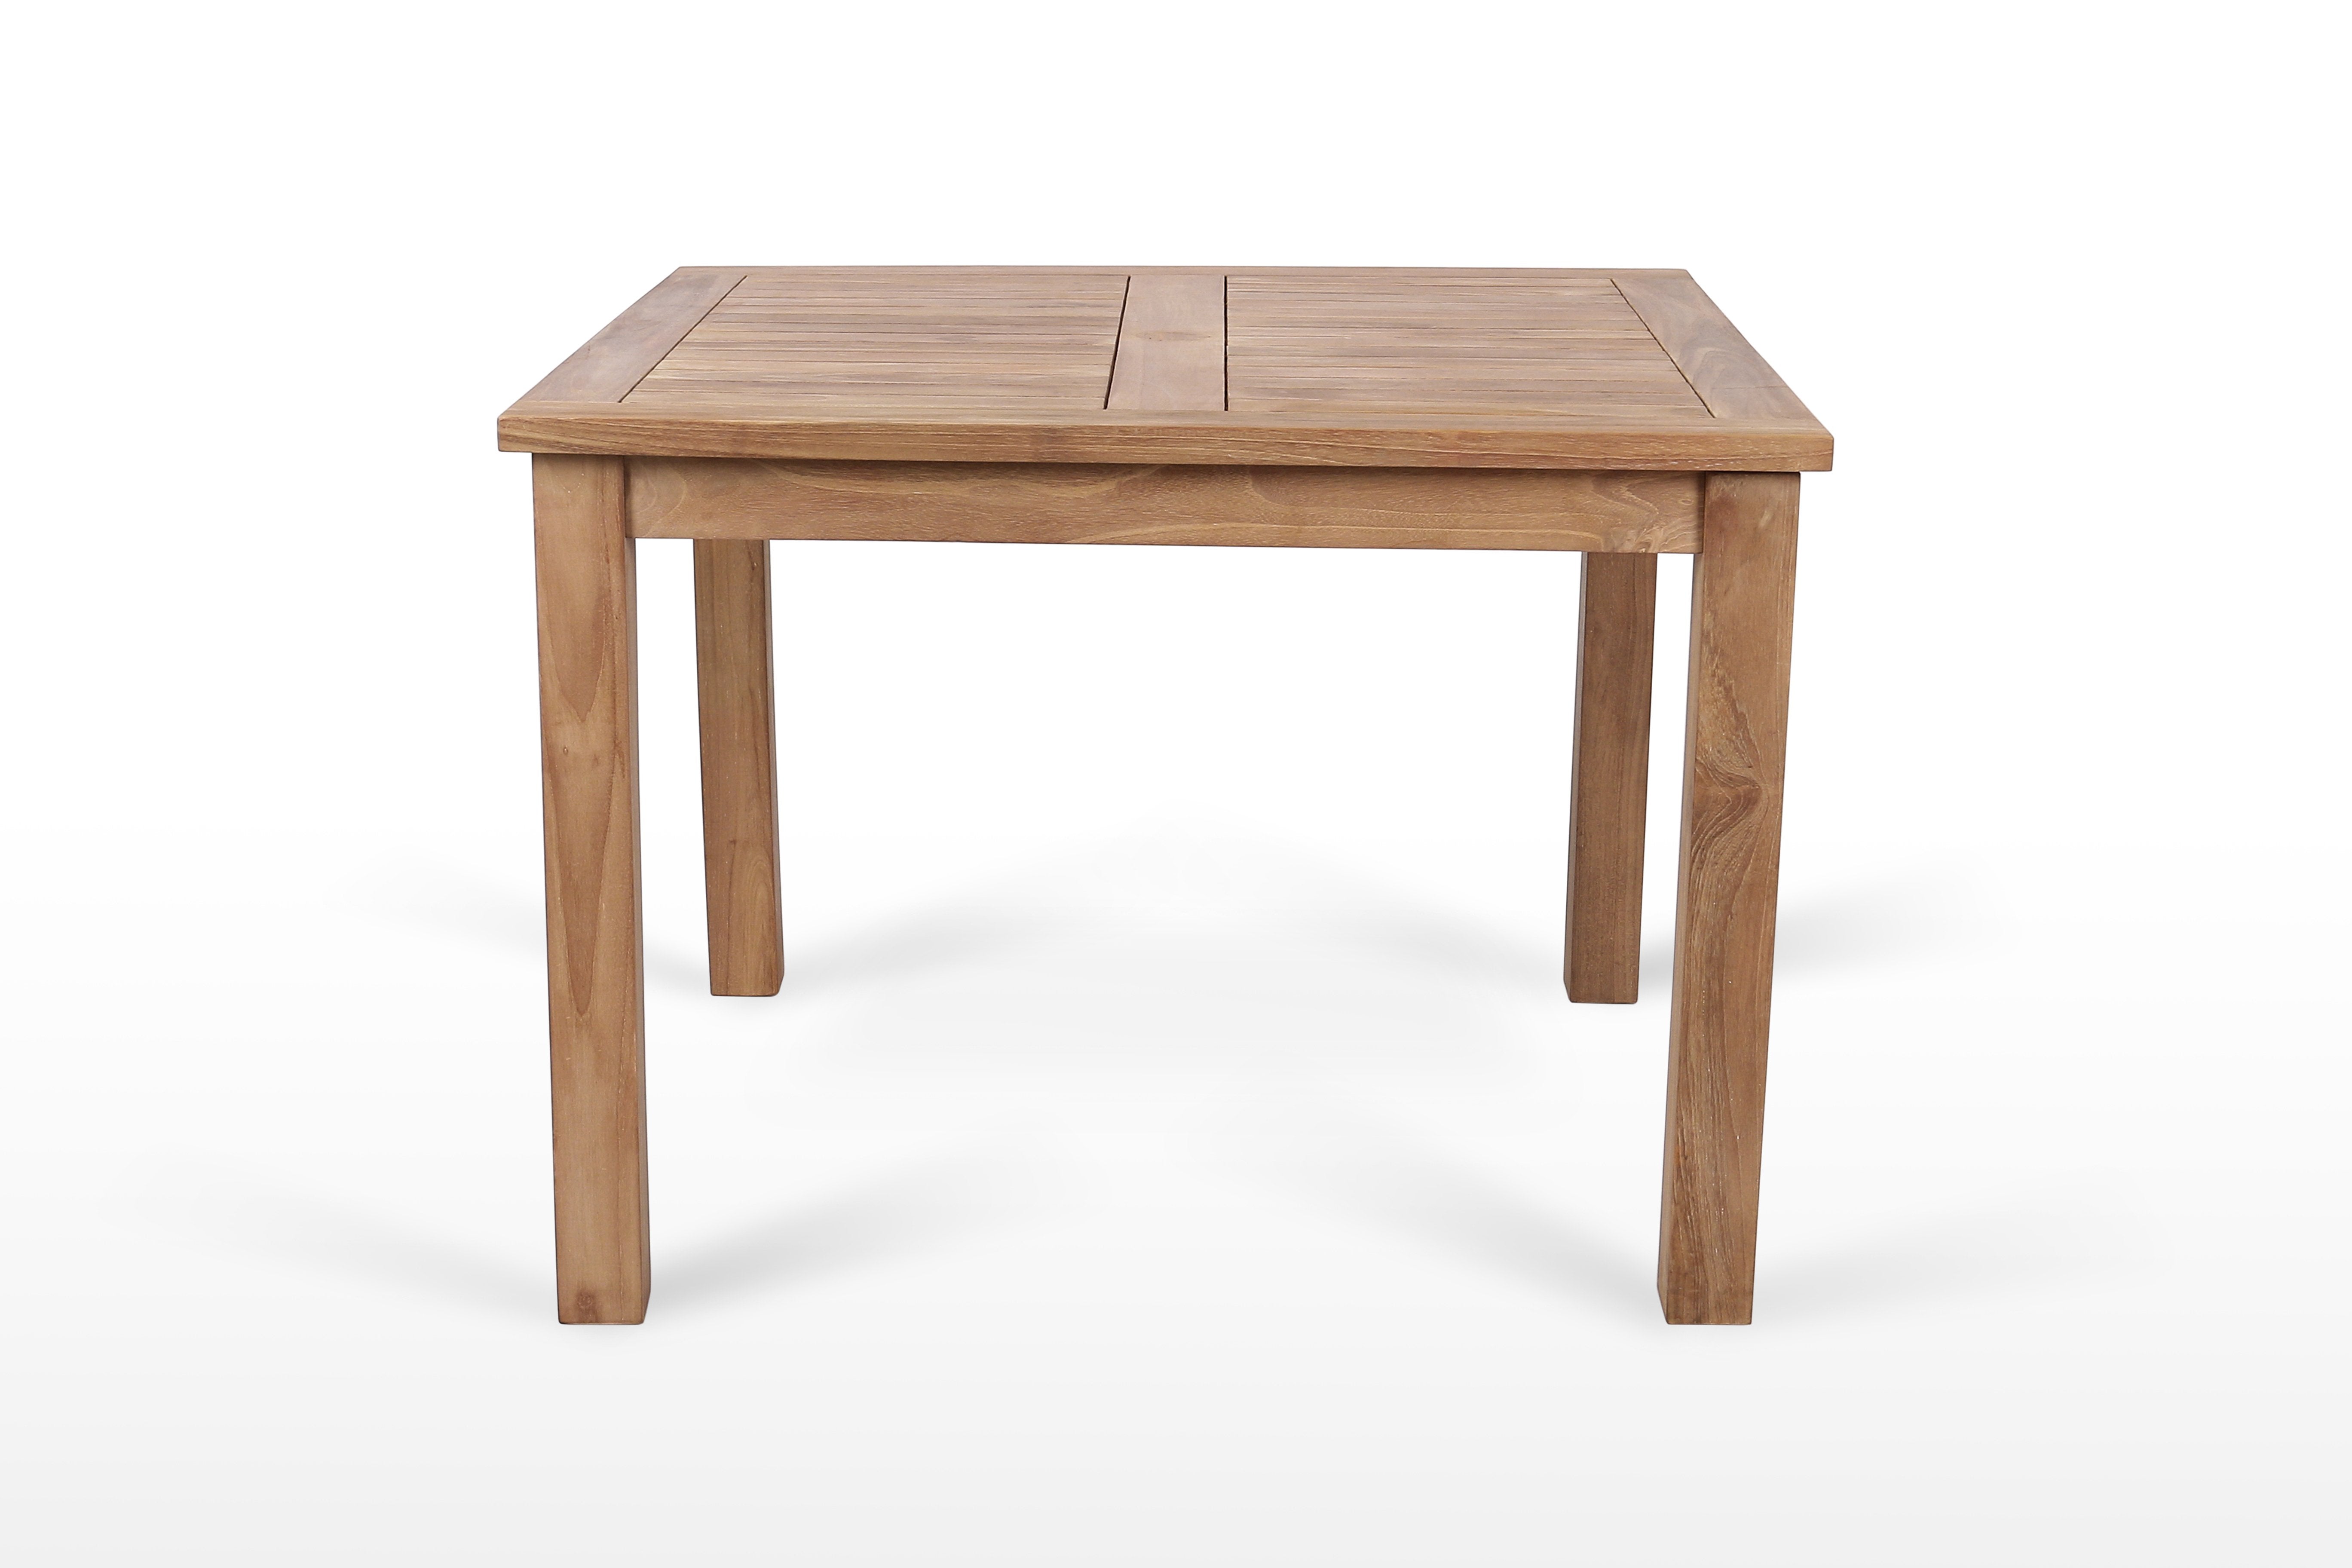 East India Montego 800 x 800mm Table - Tucker Barbecues